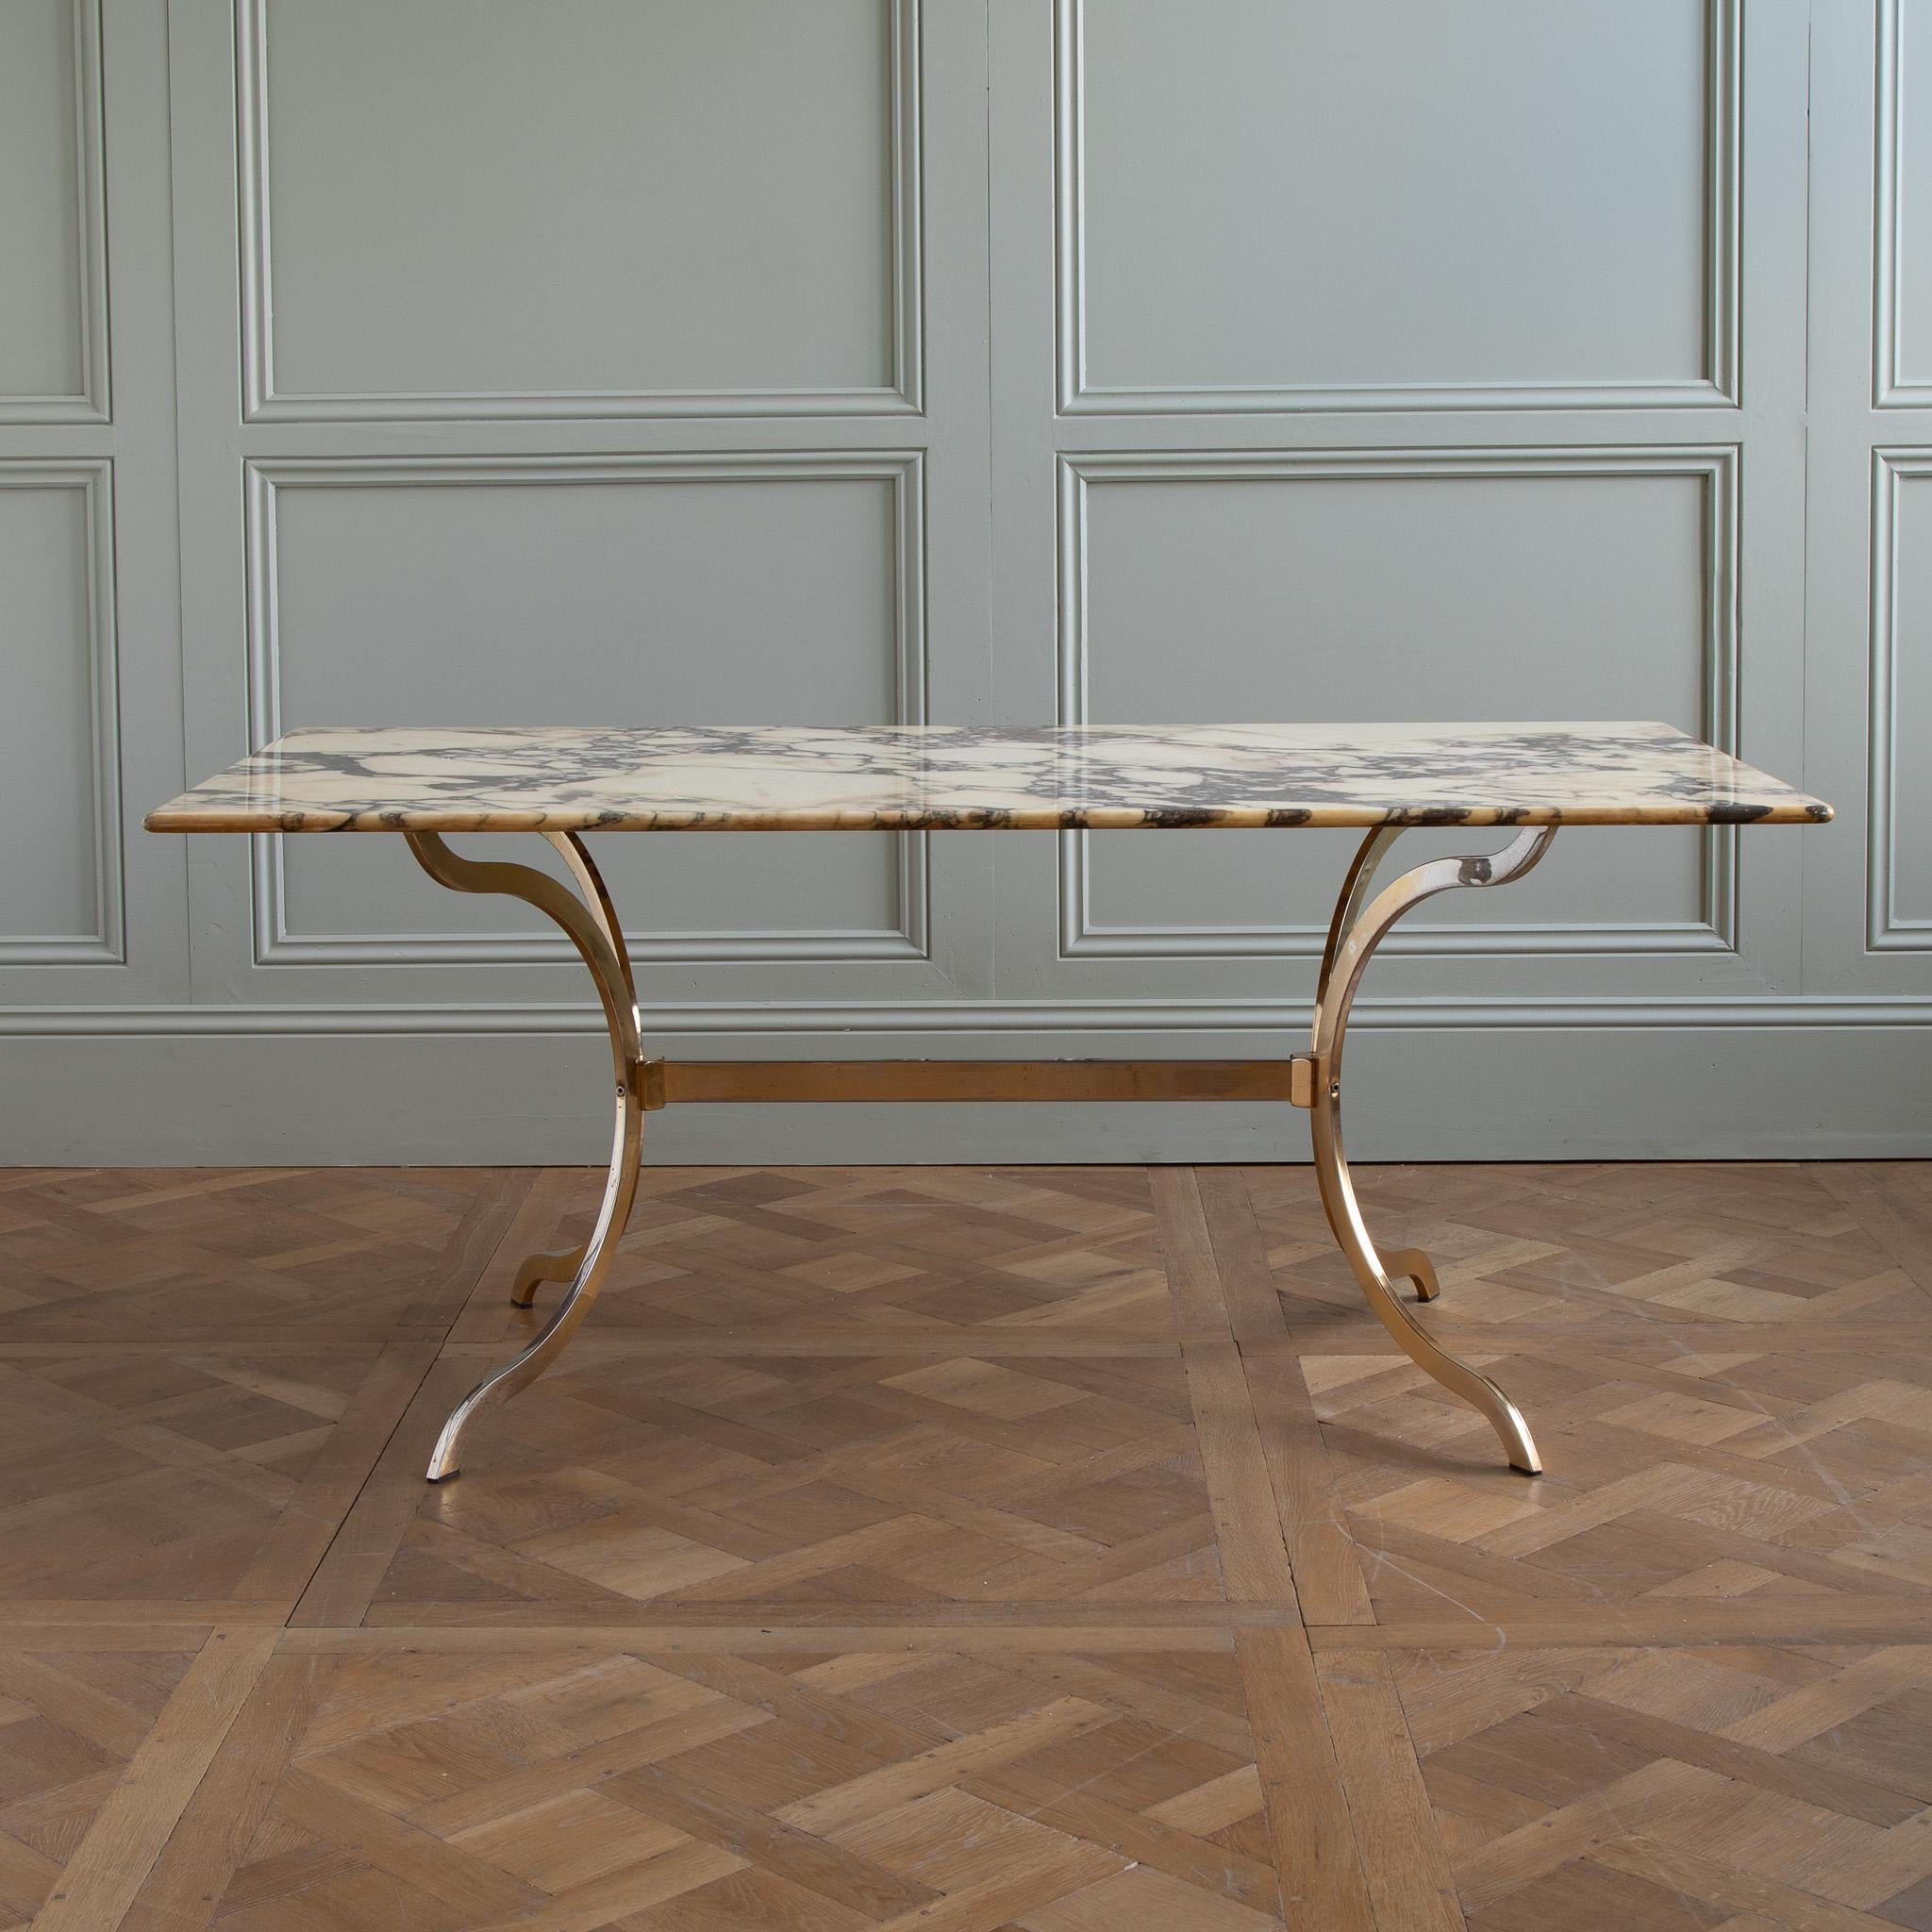 This stunning 1960's designer table is a true masterpiece of mid-century design. The table features a sleek and elegant design with clean lines and a minimalist aesthetic. The table is constructed from high-quality materials, including a beautiful